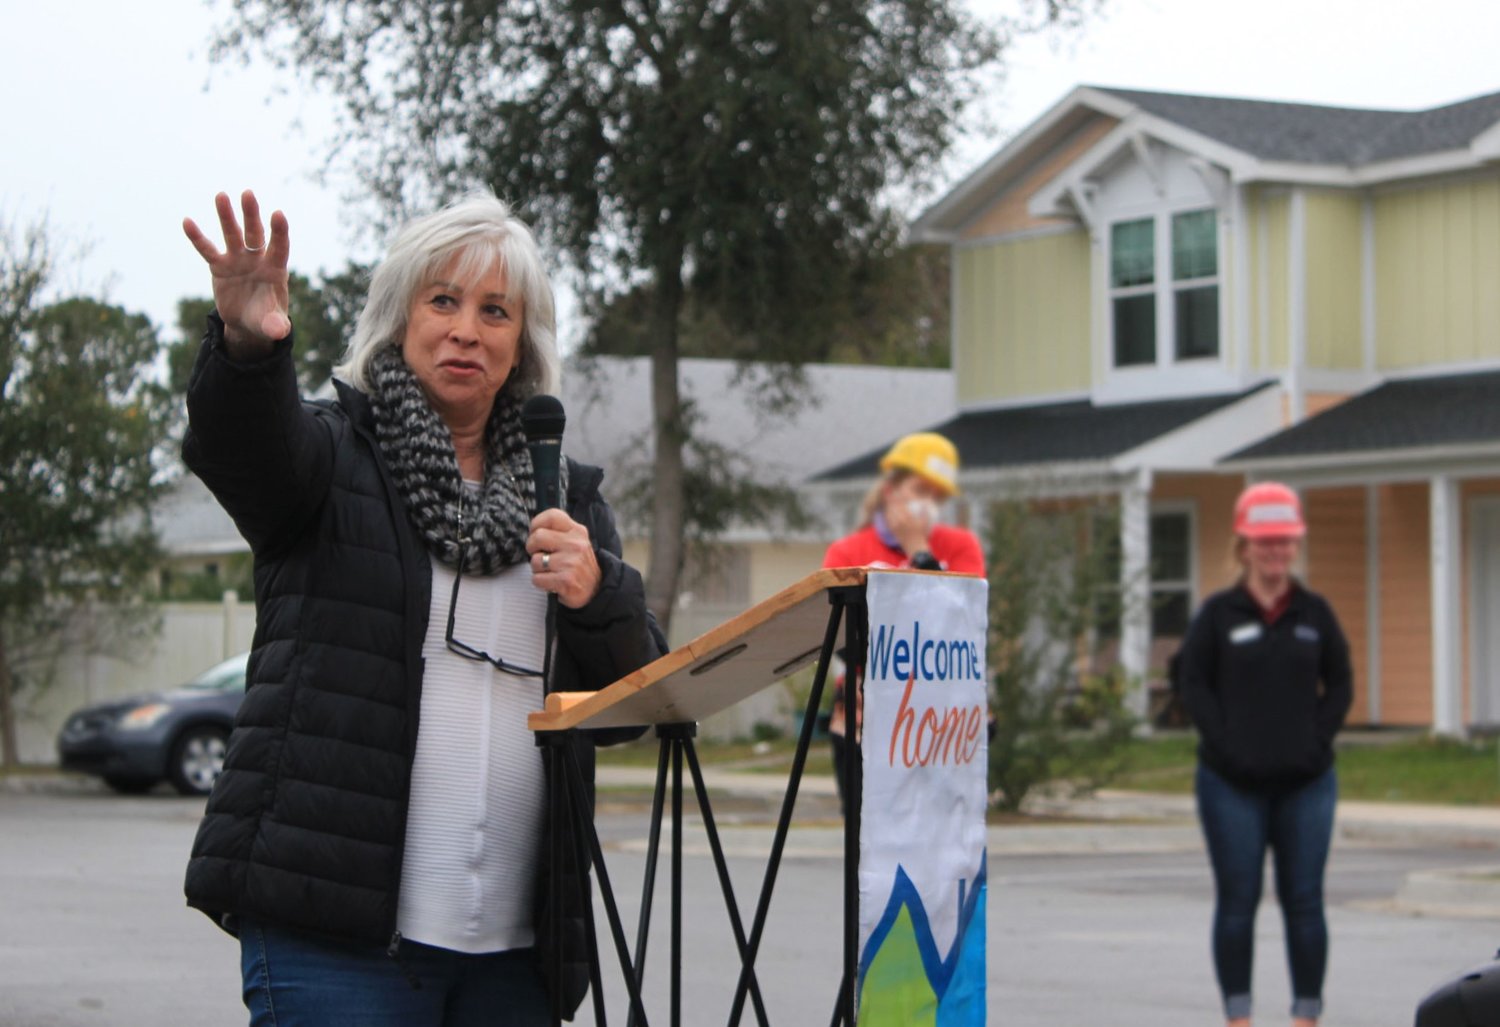 A team of 24 top executives in Jacksonville took part in Beaches Habitat’s third annual CEO Build event on Jan. 28. They helped to build four homes.